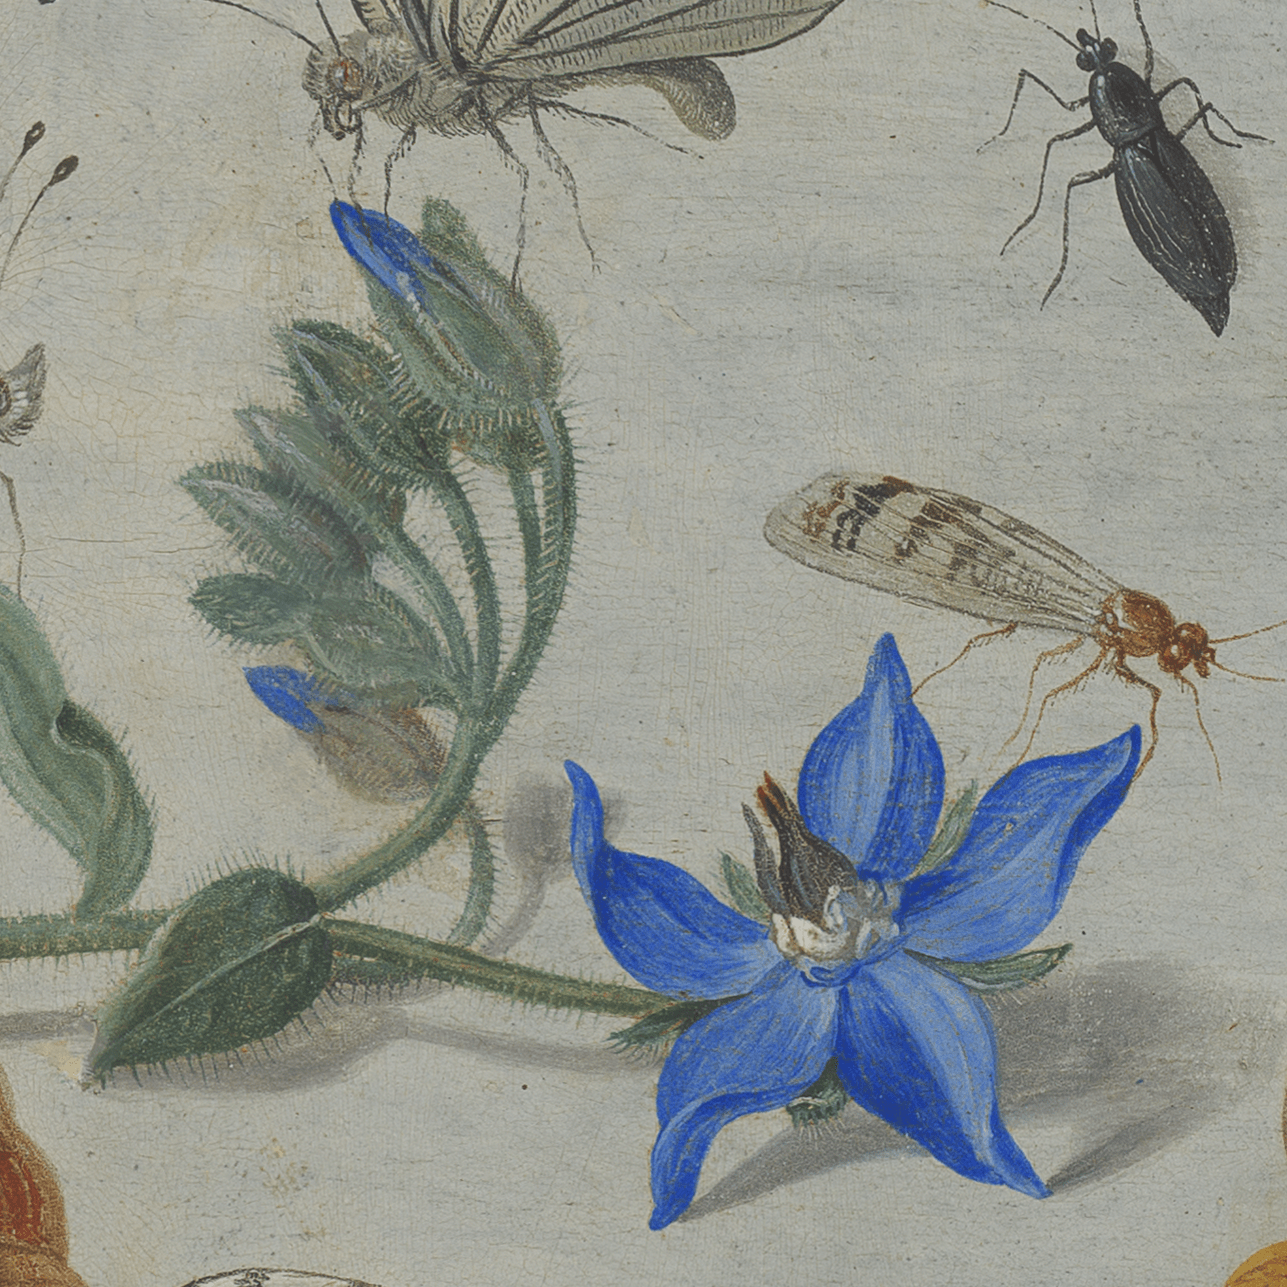 Jan van Kessel - Study of Insects, Flowers and Shells, 1659 - On Paper